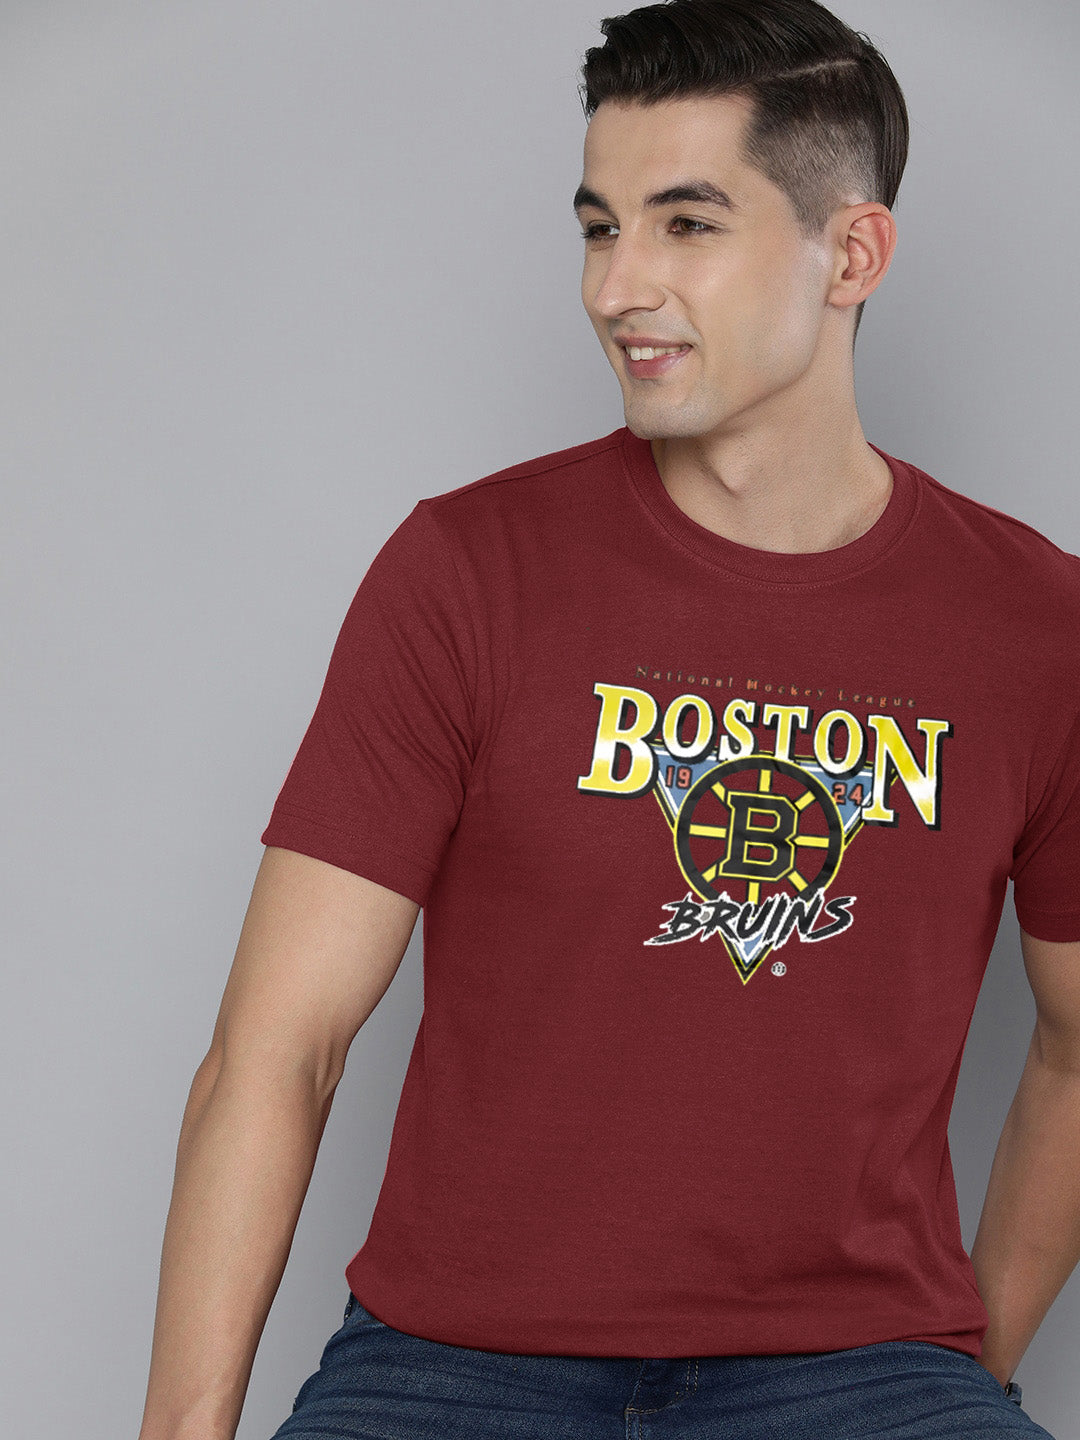 47 Single Jersey Crew Neck Tee Shirt For Men-Maroon with Print-SP1658/RT2397